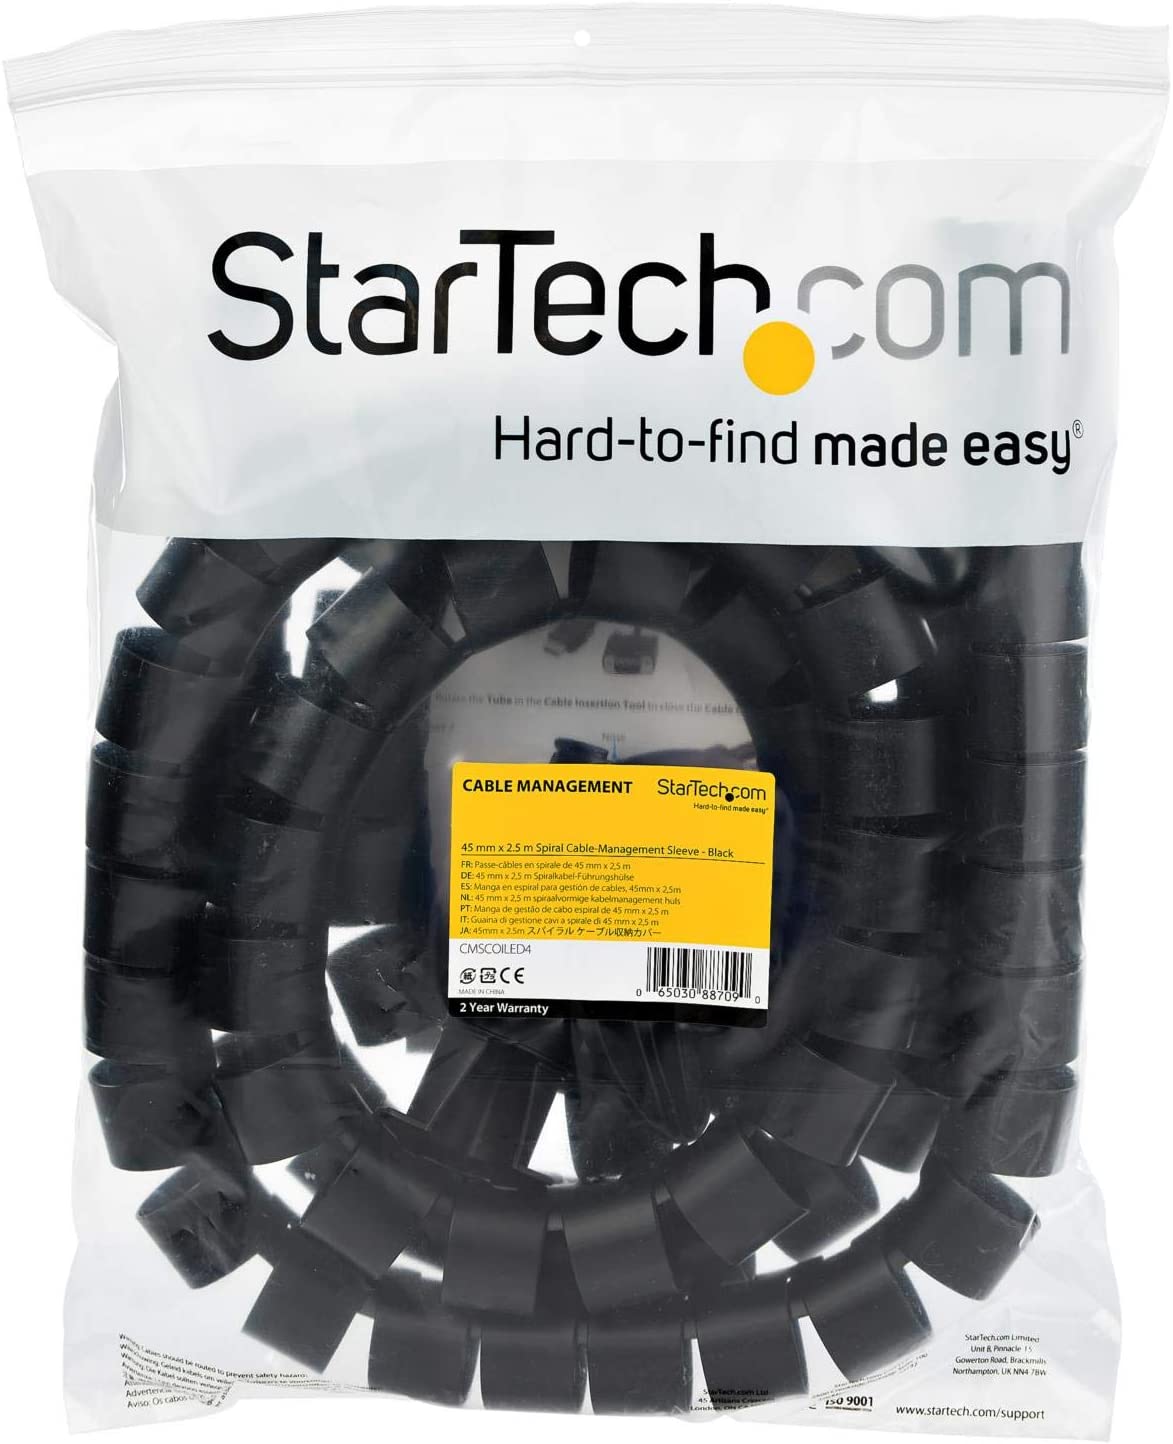 StarTech.com 2.5m (8.2ft) Cable Management Sleeve - 1.8" Diameter - Expandable Coiled Cord Organizer w/Cable Loading Tool (CMSCOILED4)